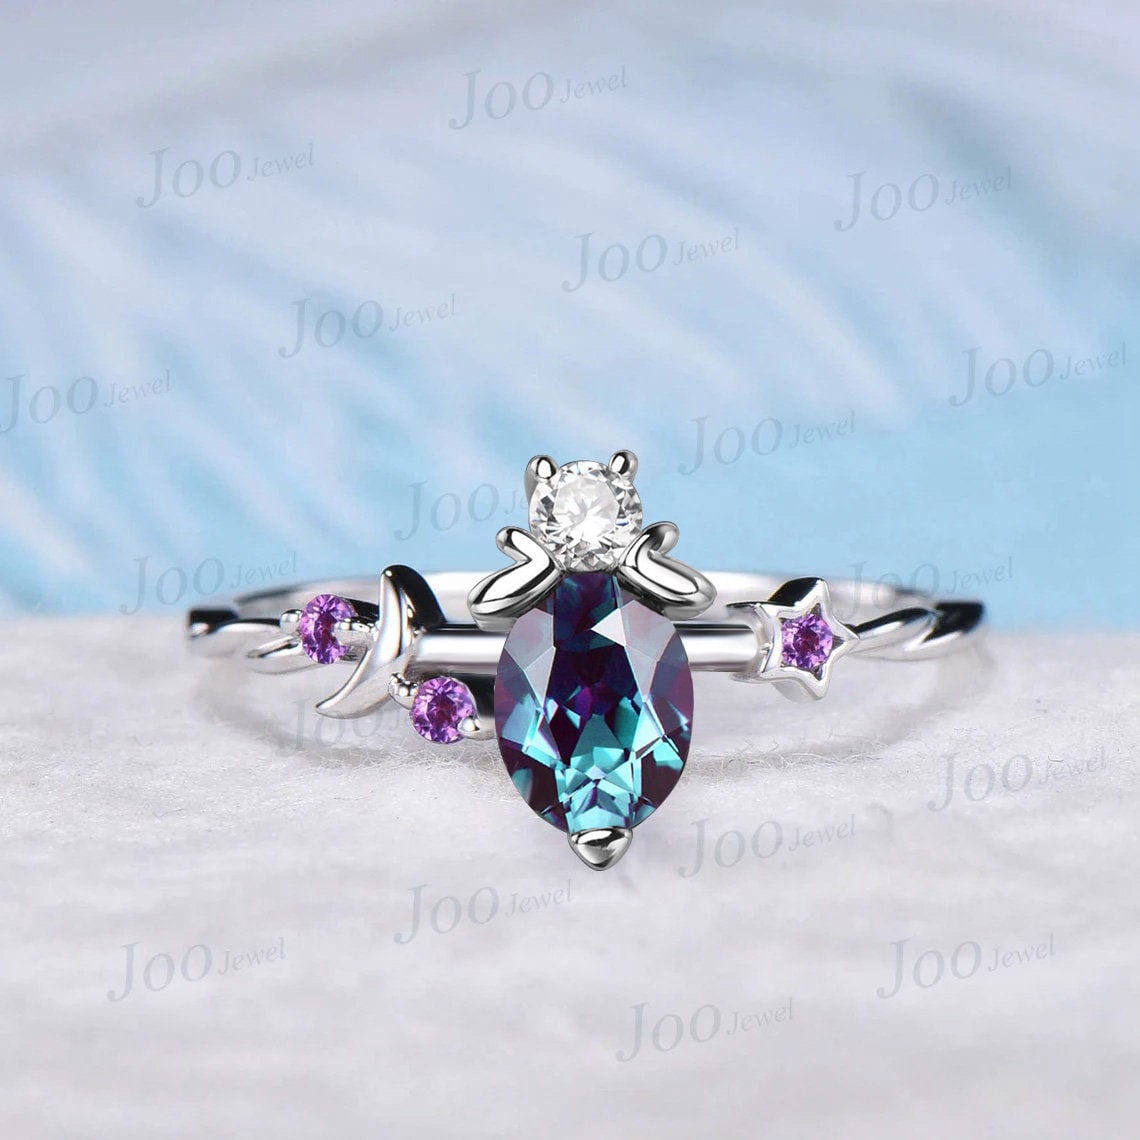 Unique Honey Bee Alexandrite Engagement Ring Moon Star Cluster Purple Amethyst Ring June Birthstone Jewelry Gift Asymmetrical Promise Rings